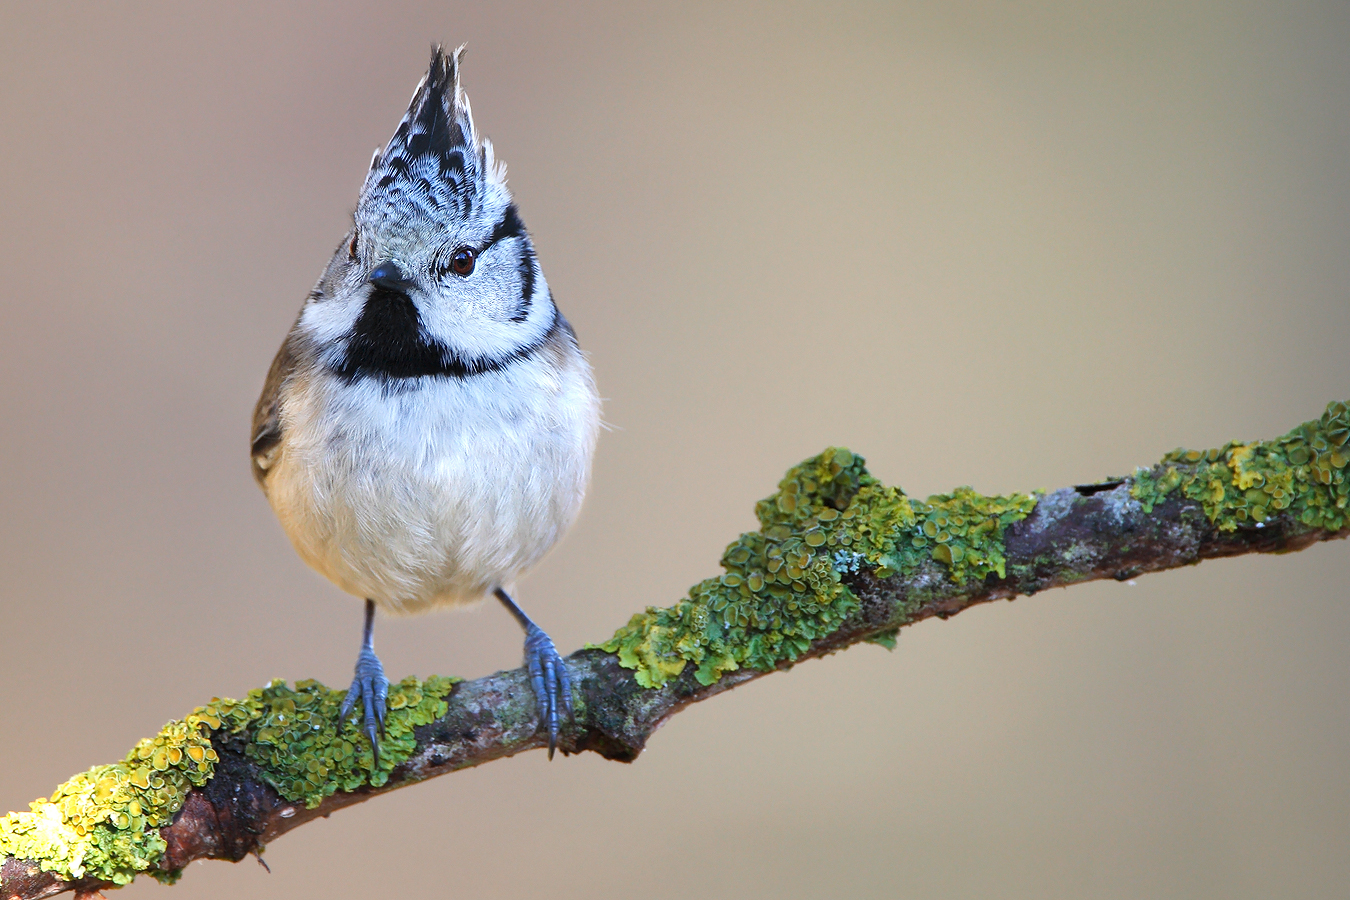 Crested tit